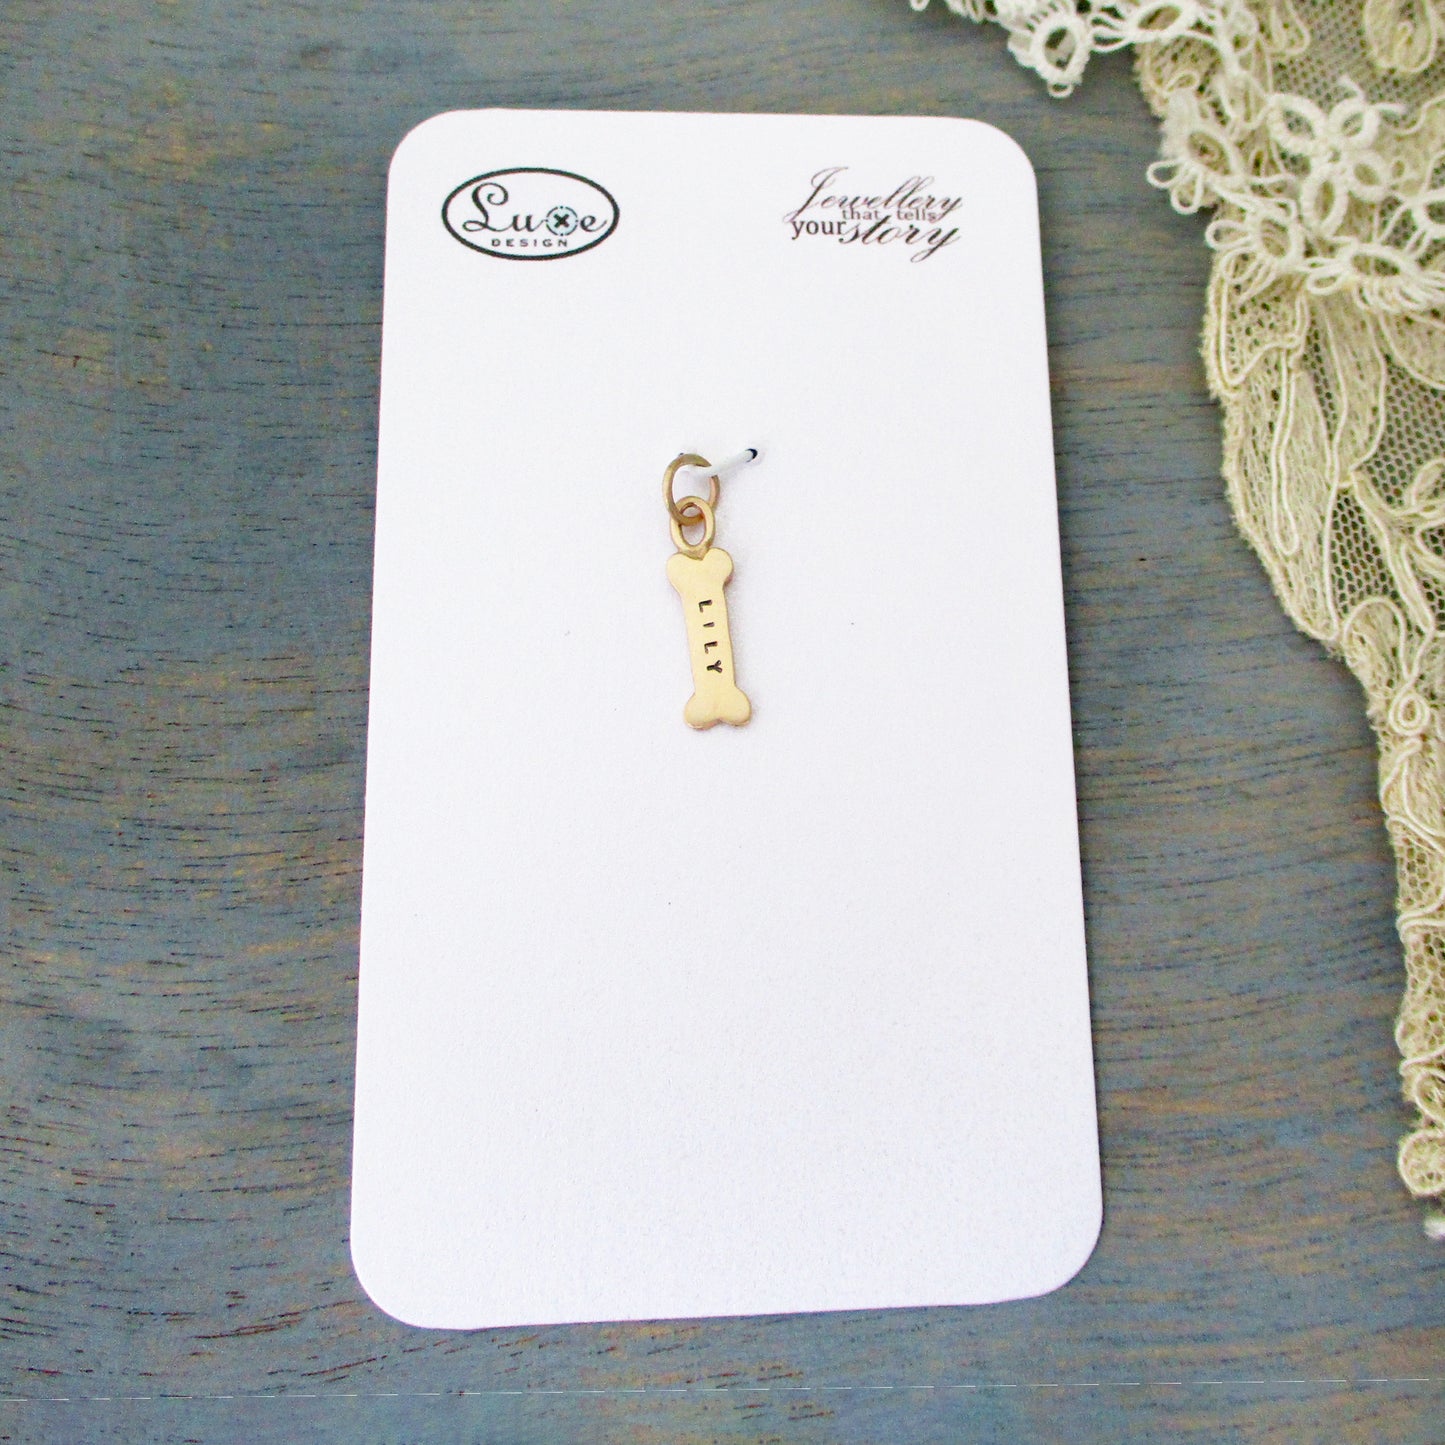 Load image into Gallery viewer, 14 Karat Gold Personalized Dog Bone Charm - Luxe Design Jewellery
